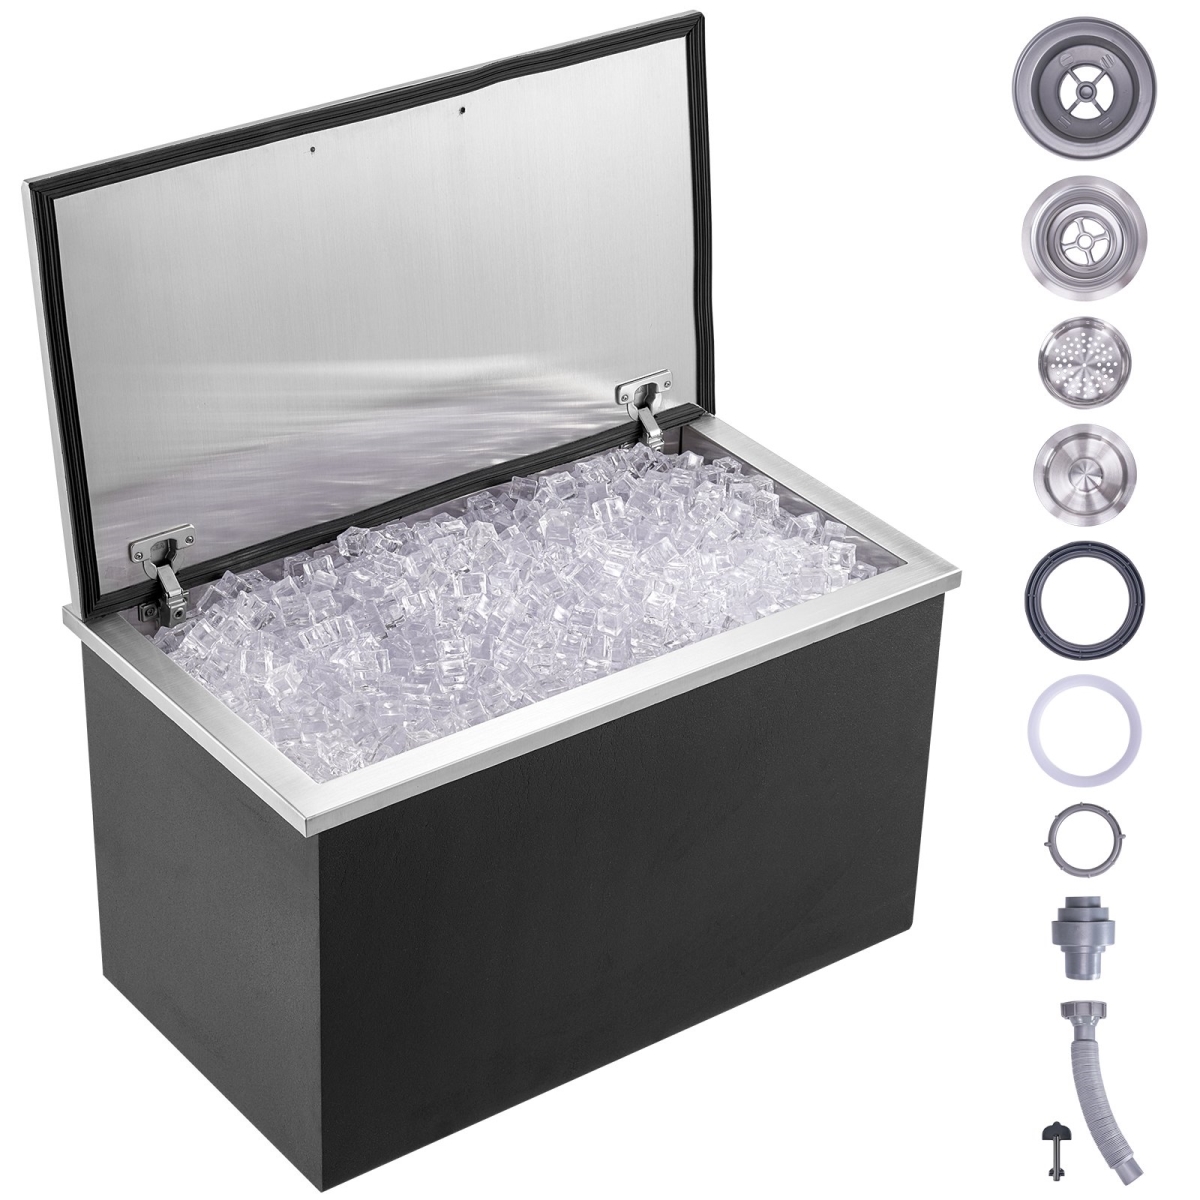 Picture of Vevor QRSCBCFG20LXN50MQV0 24 x 20 x 15 in. Stainless Steel Drop in Ice Chest